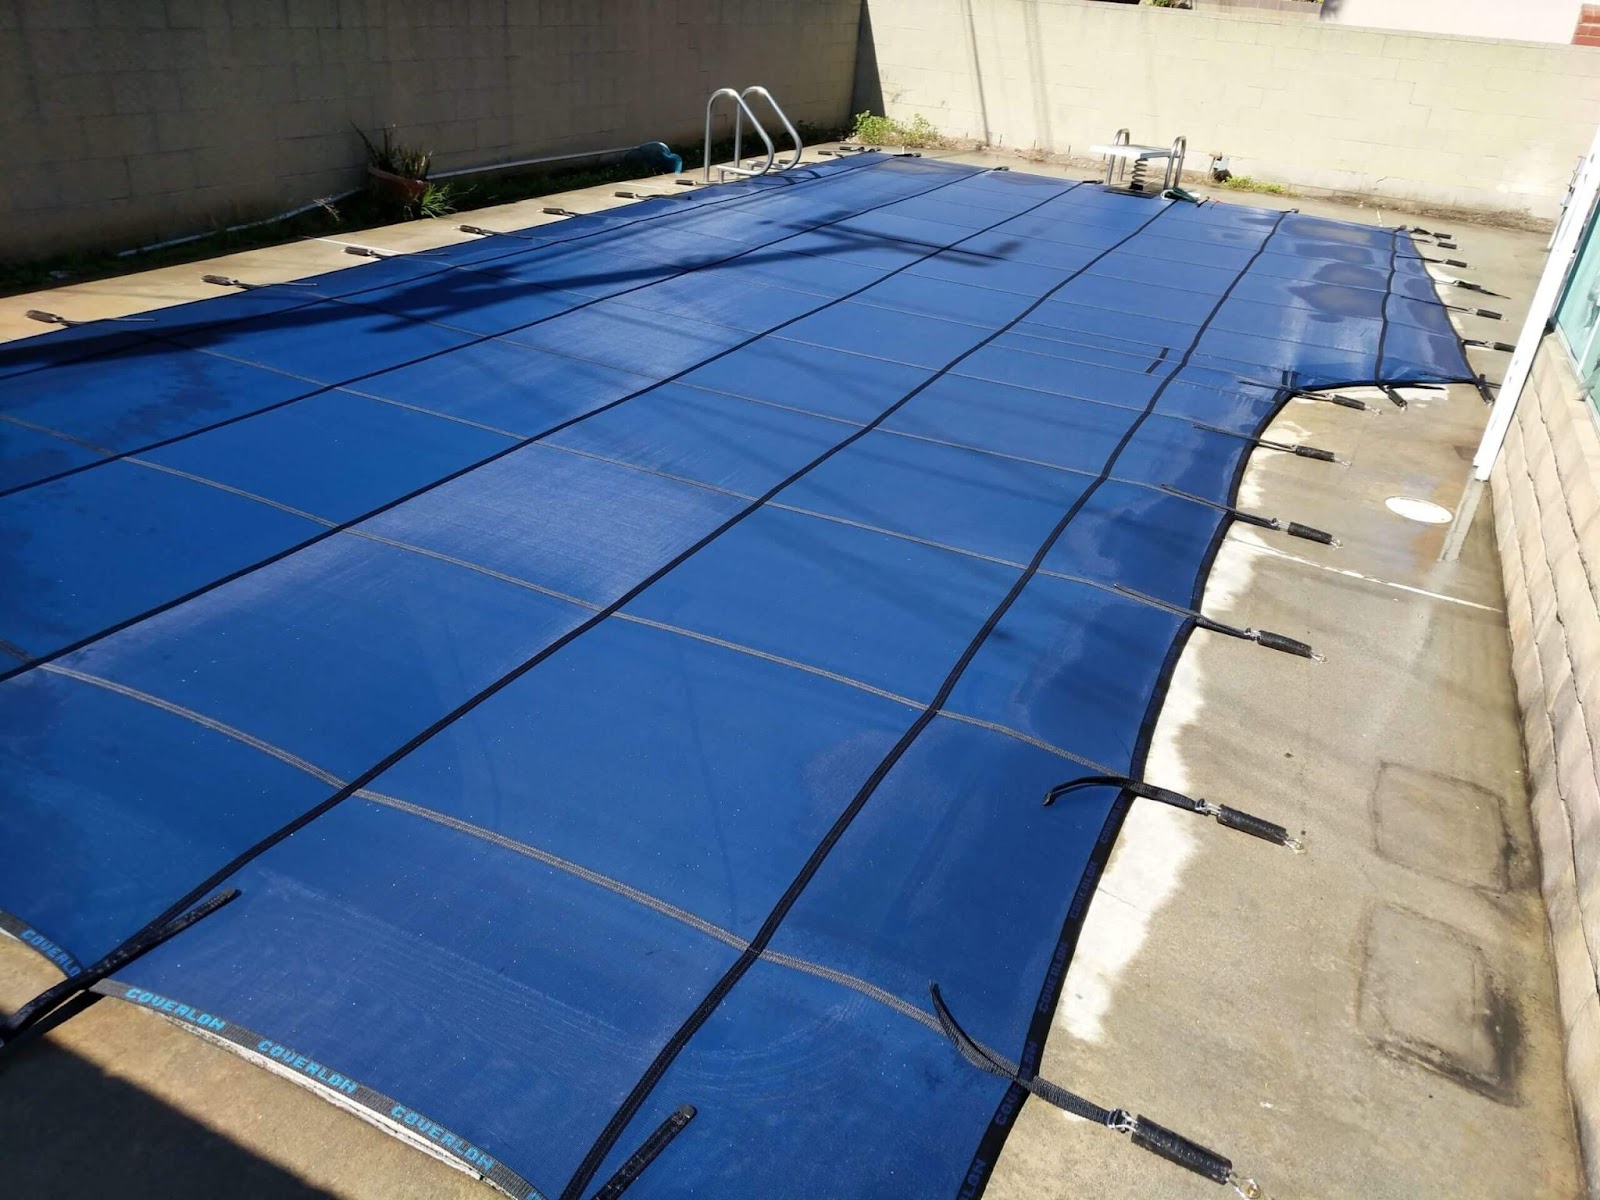 blue mesh pool cover installed over a small swimming pool